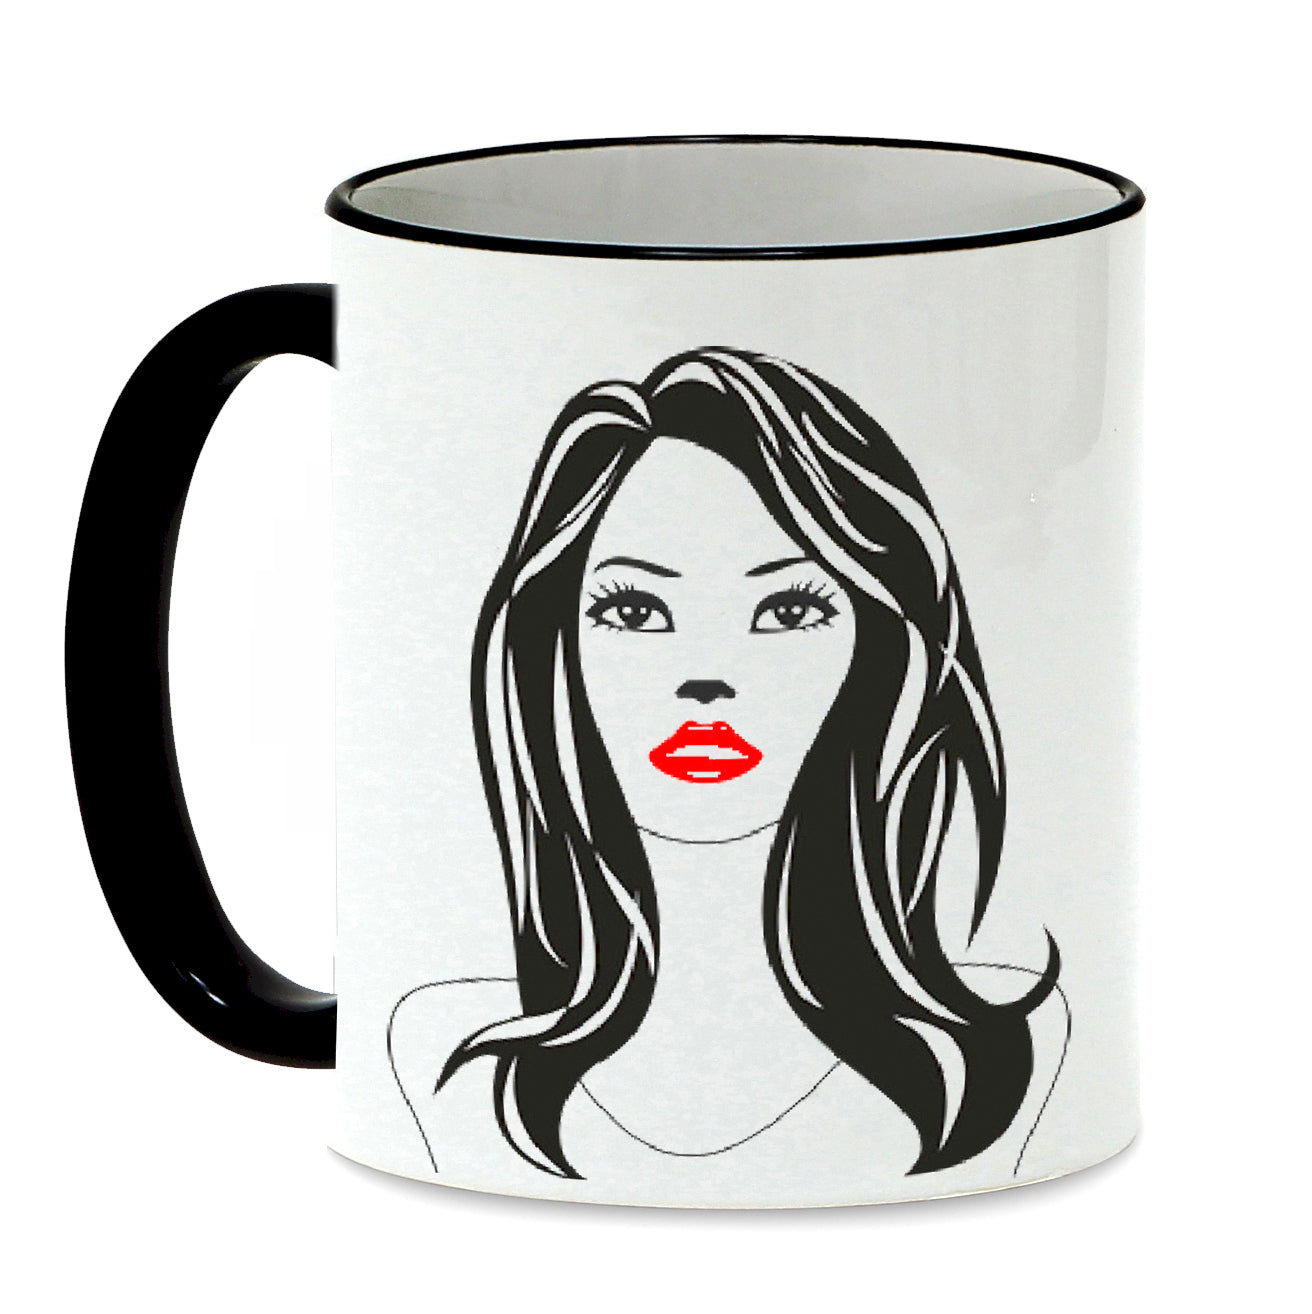 SUBLIMART: Bella Donna Lineart - Mug with black handle and rim featuring styled hand drawn trendy women profiles drawings.